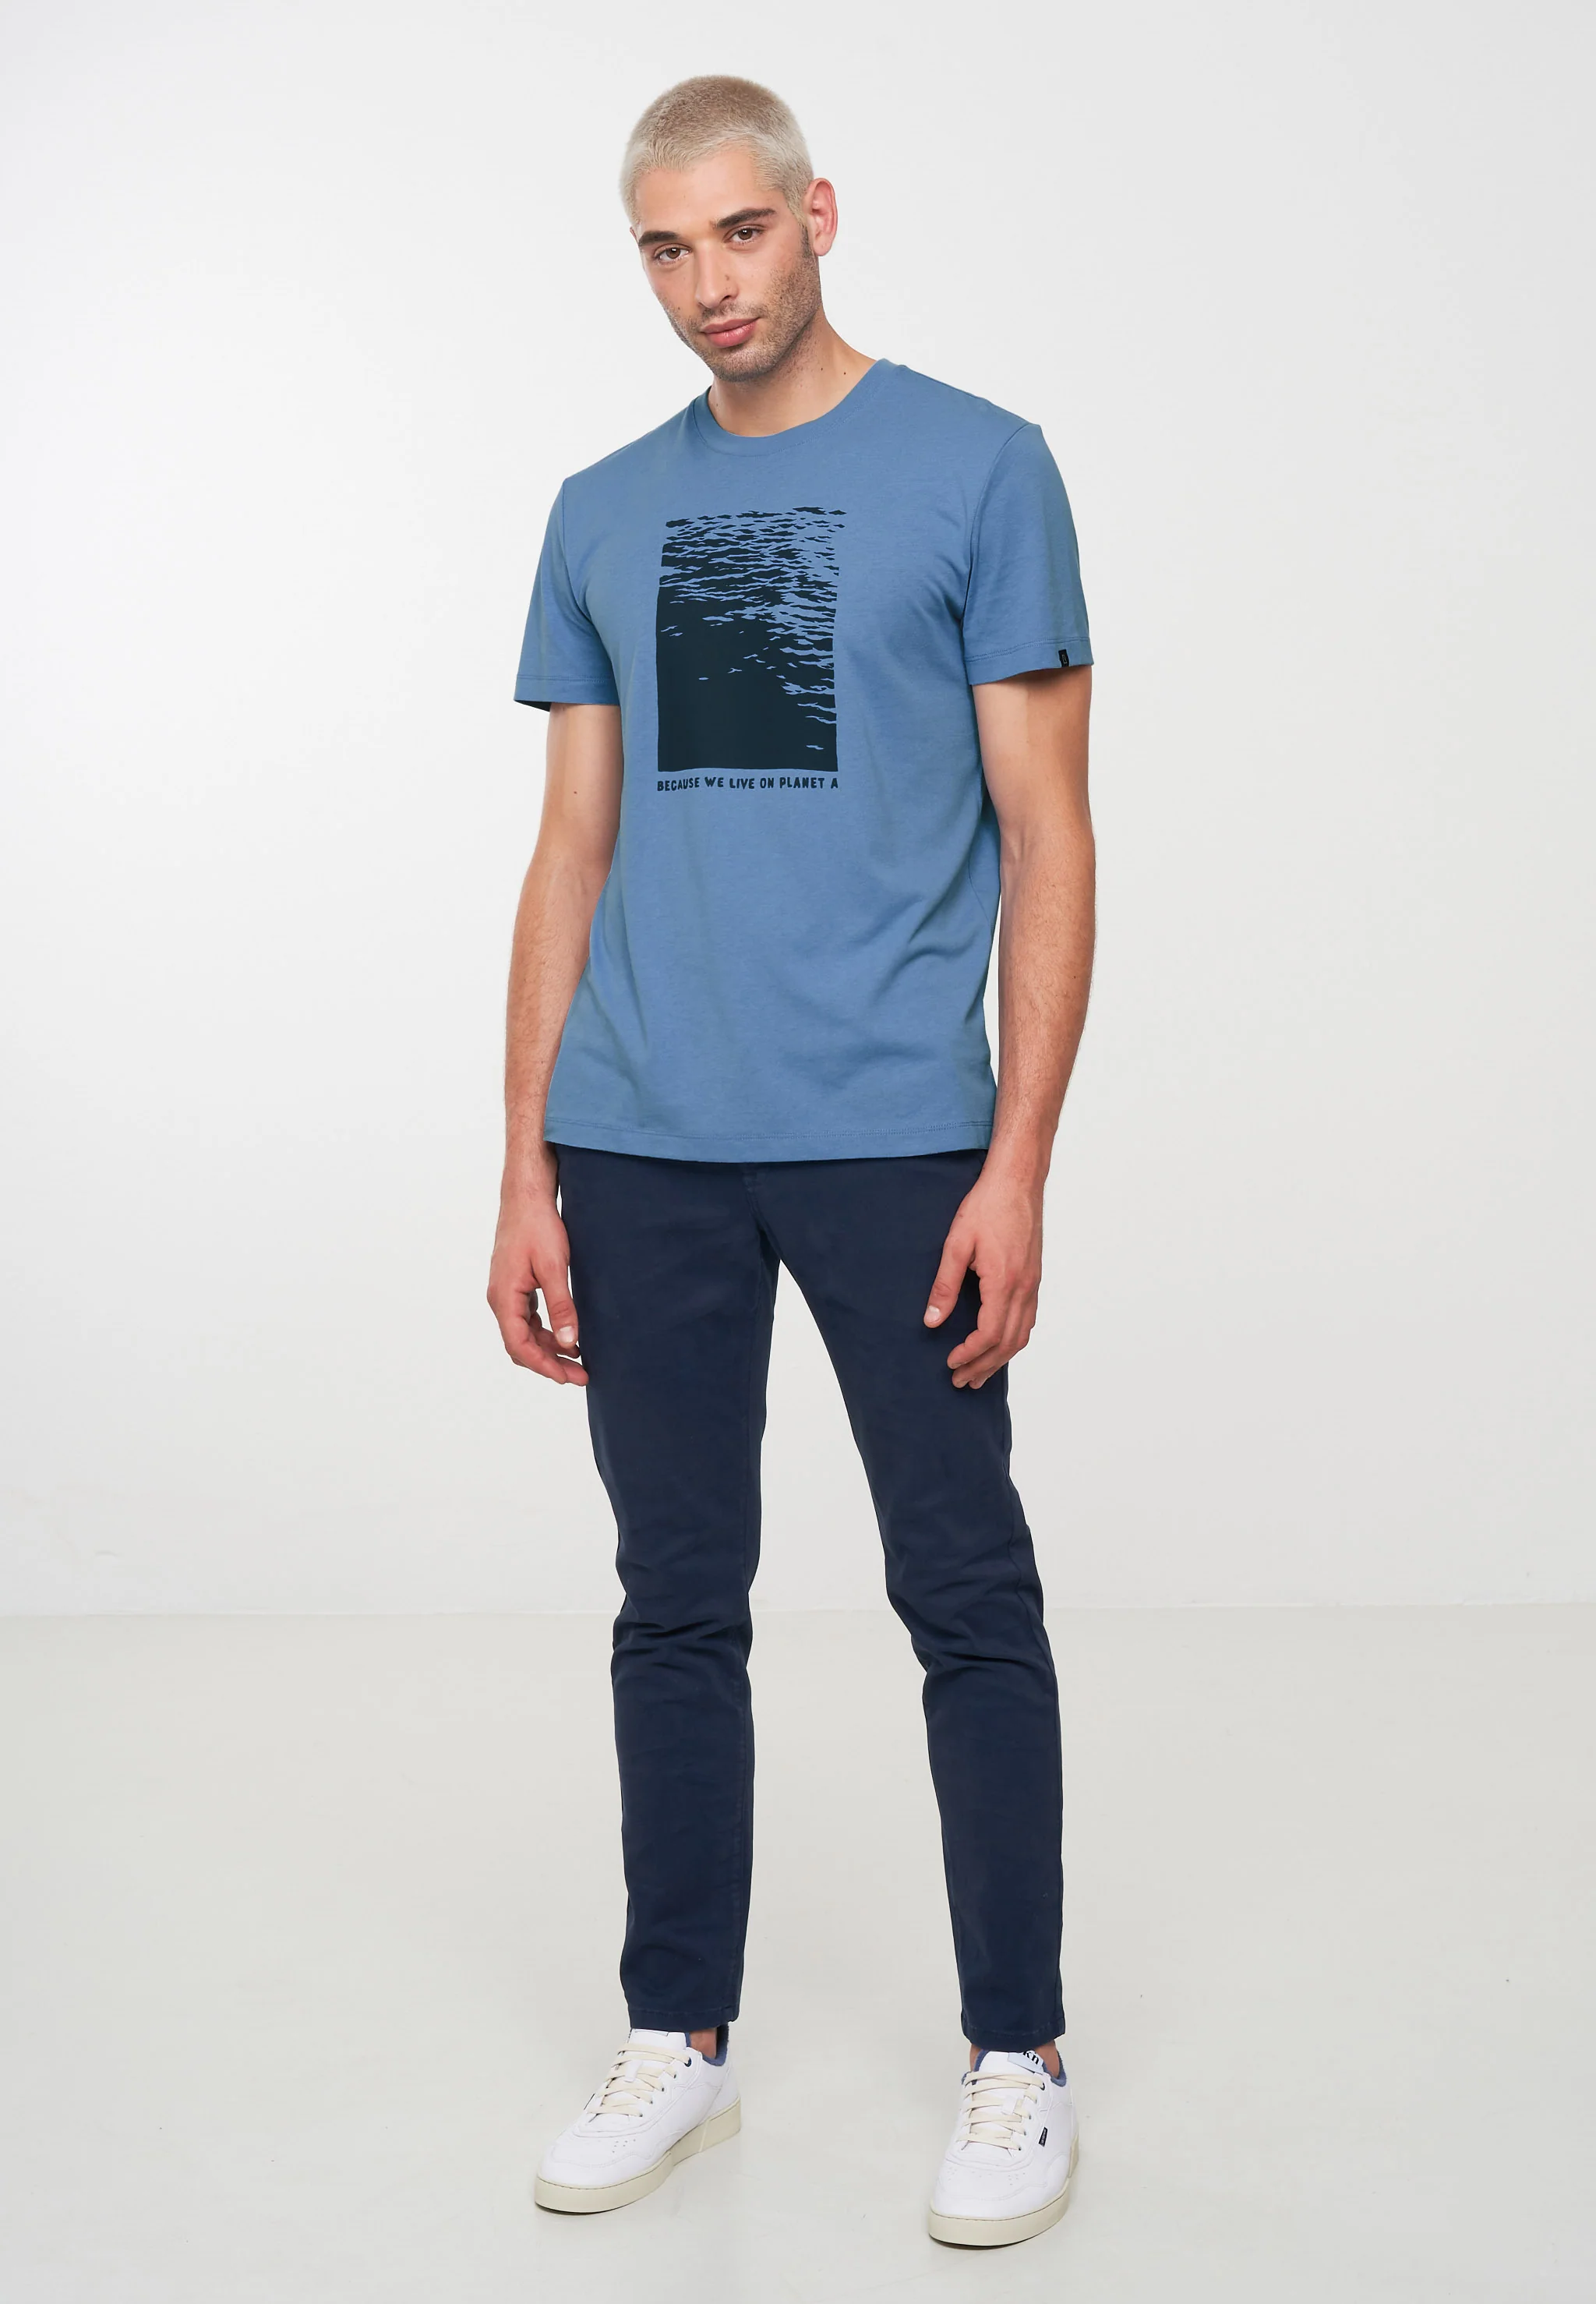 RECOLUTION-AGAVE-WATER-IS-LIFE-Shirt-water-blu2